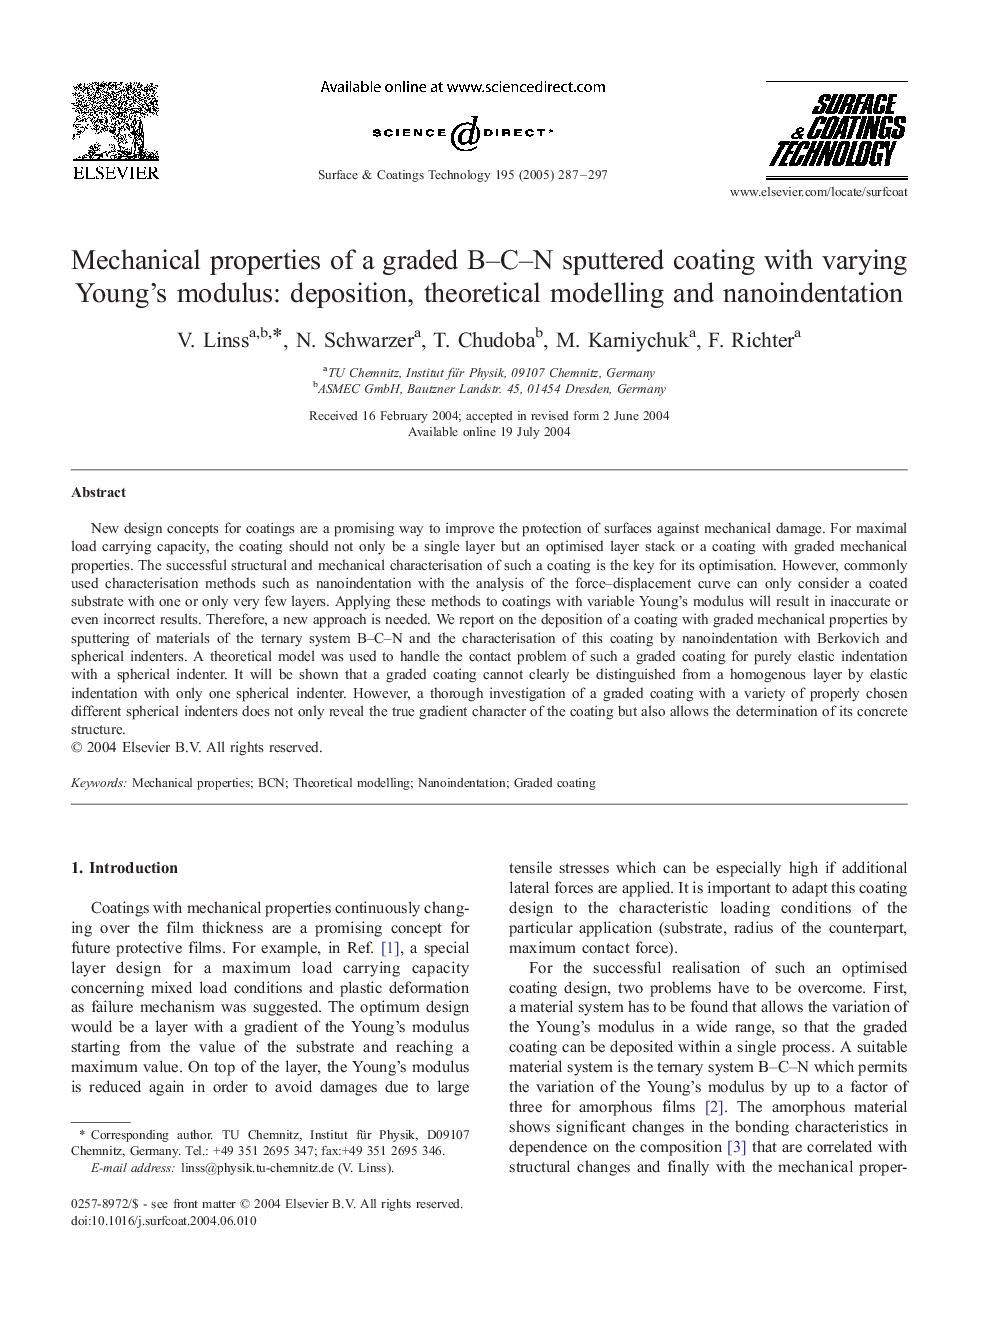 Mechanical properties of a graded B-C-N sputtered coating with varying Young's modulus: deposition, theoretical modelling and nanoindentation